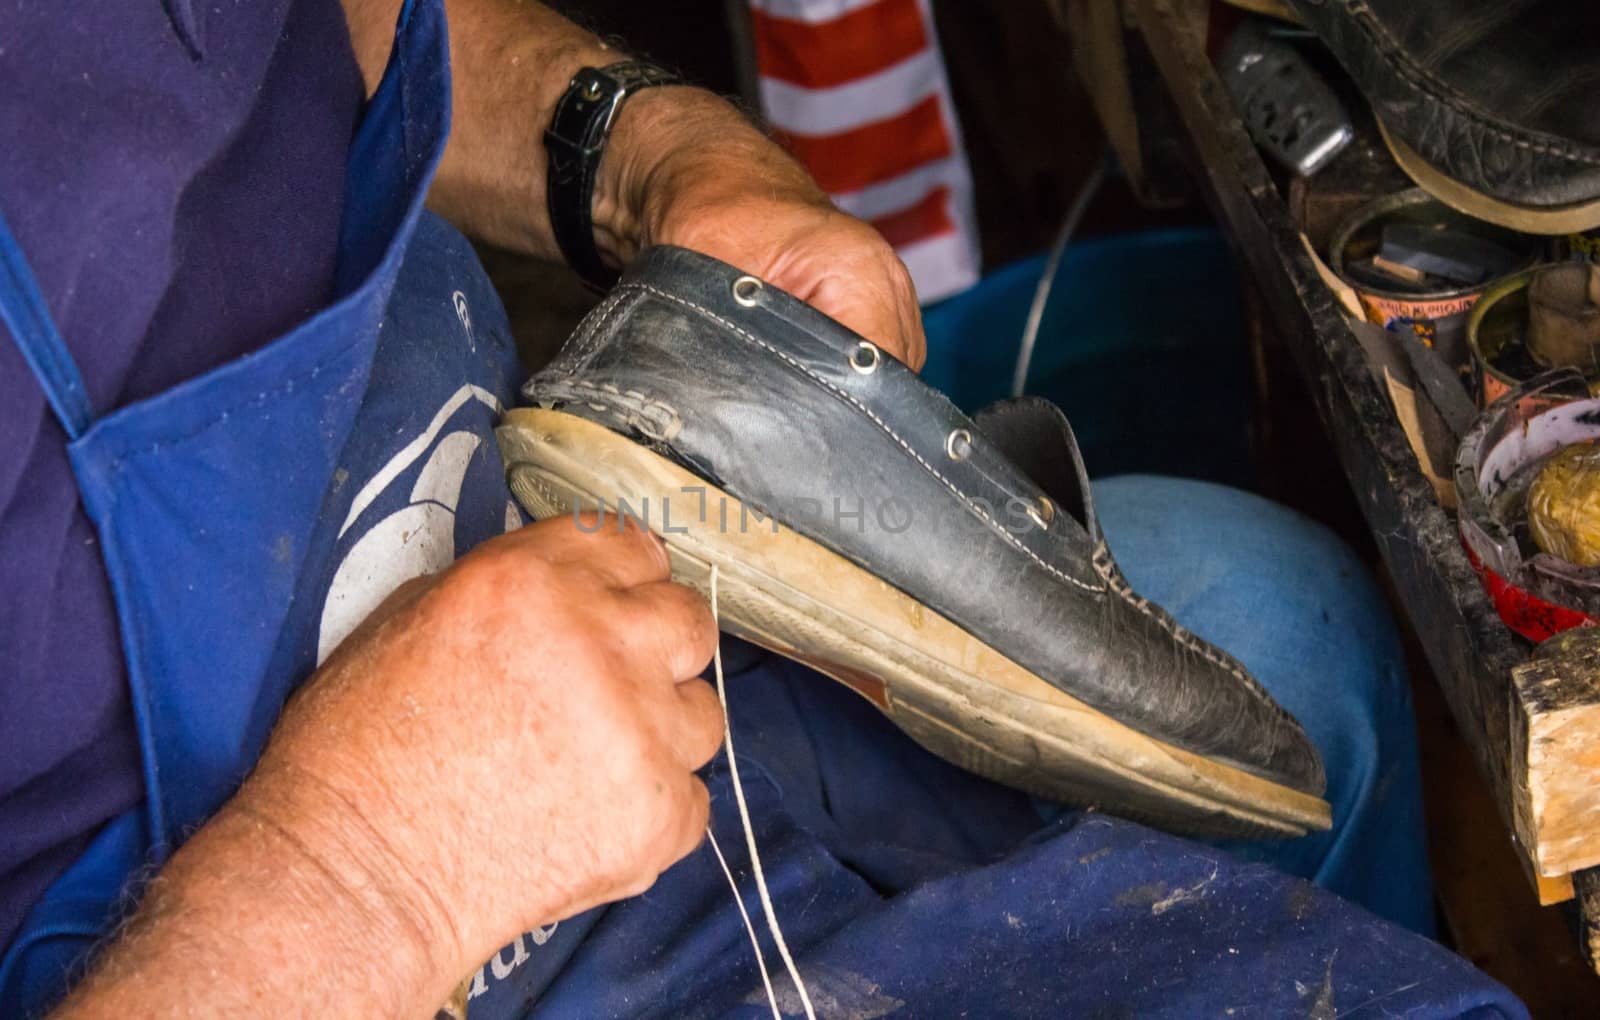 the old trade of shoemaker, now only ancient traditions cultivate a hobby